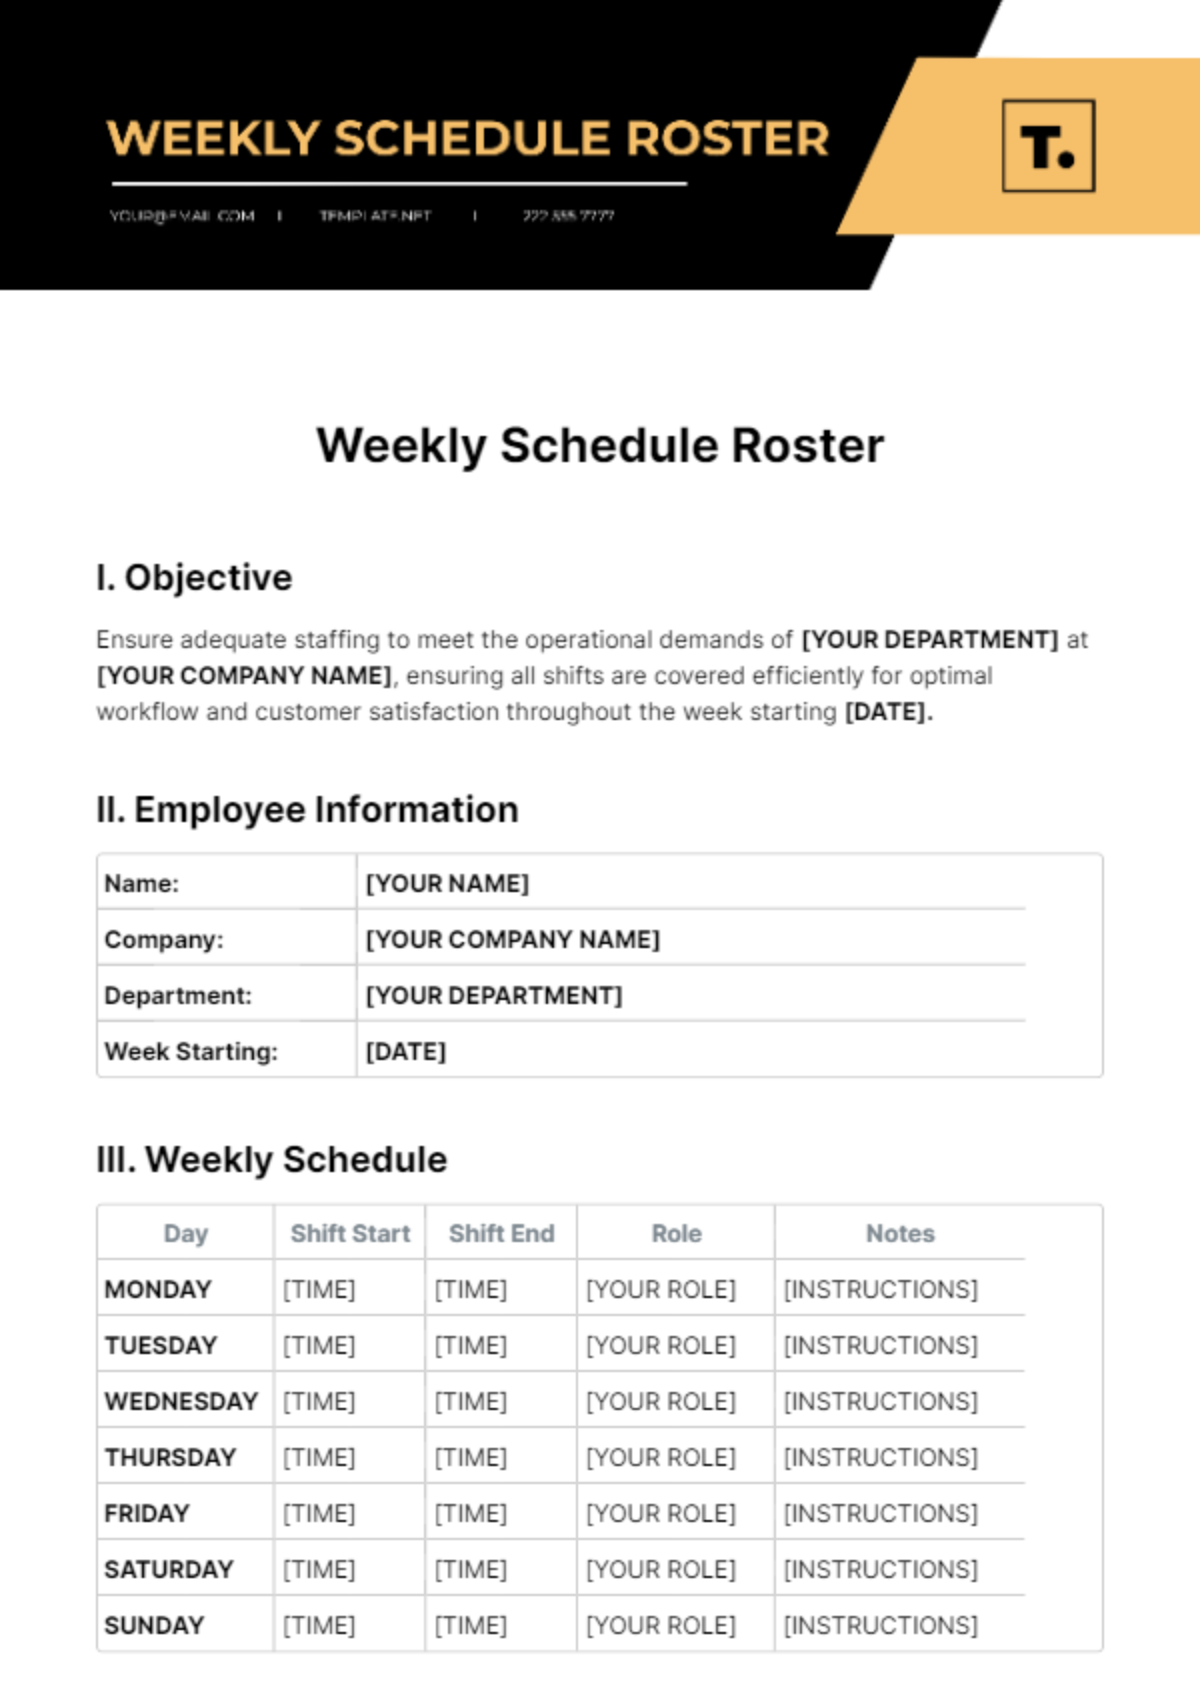 Weekly Schedule Roster Template